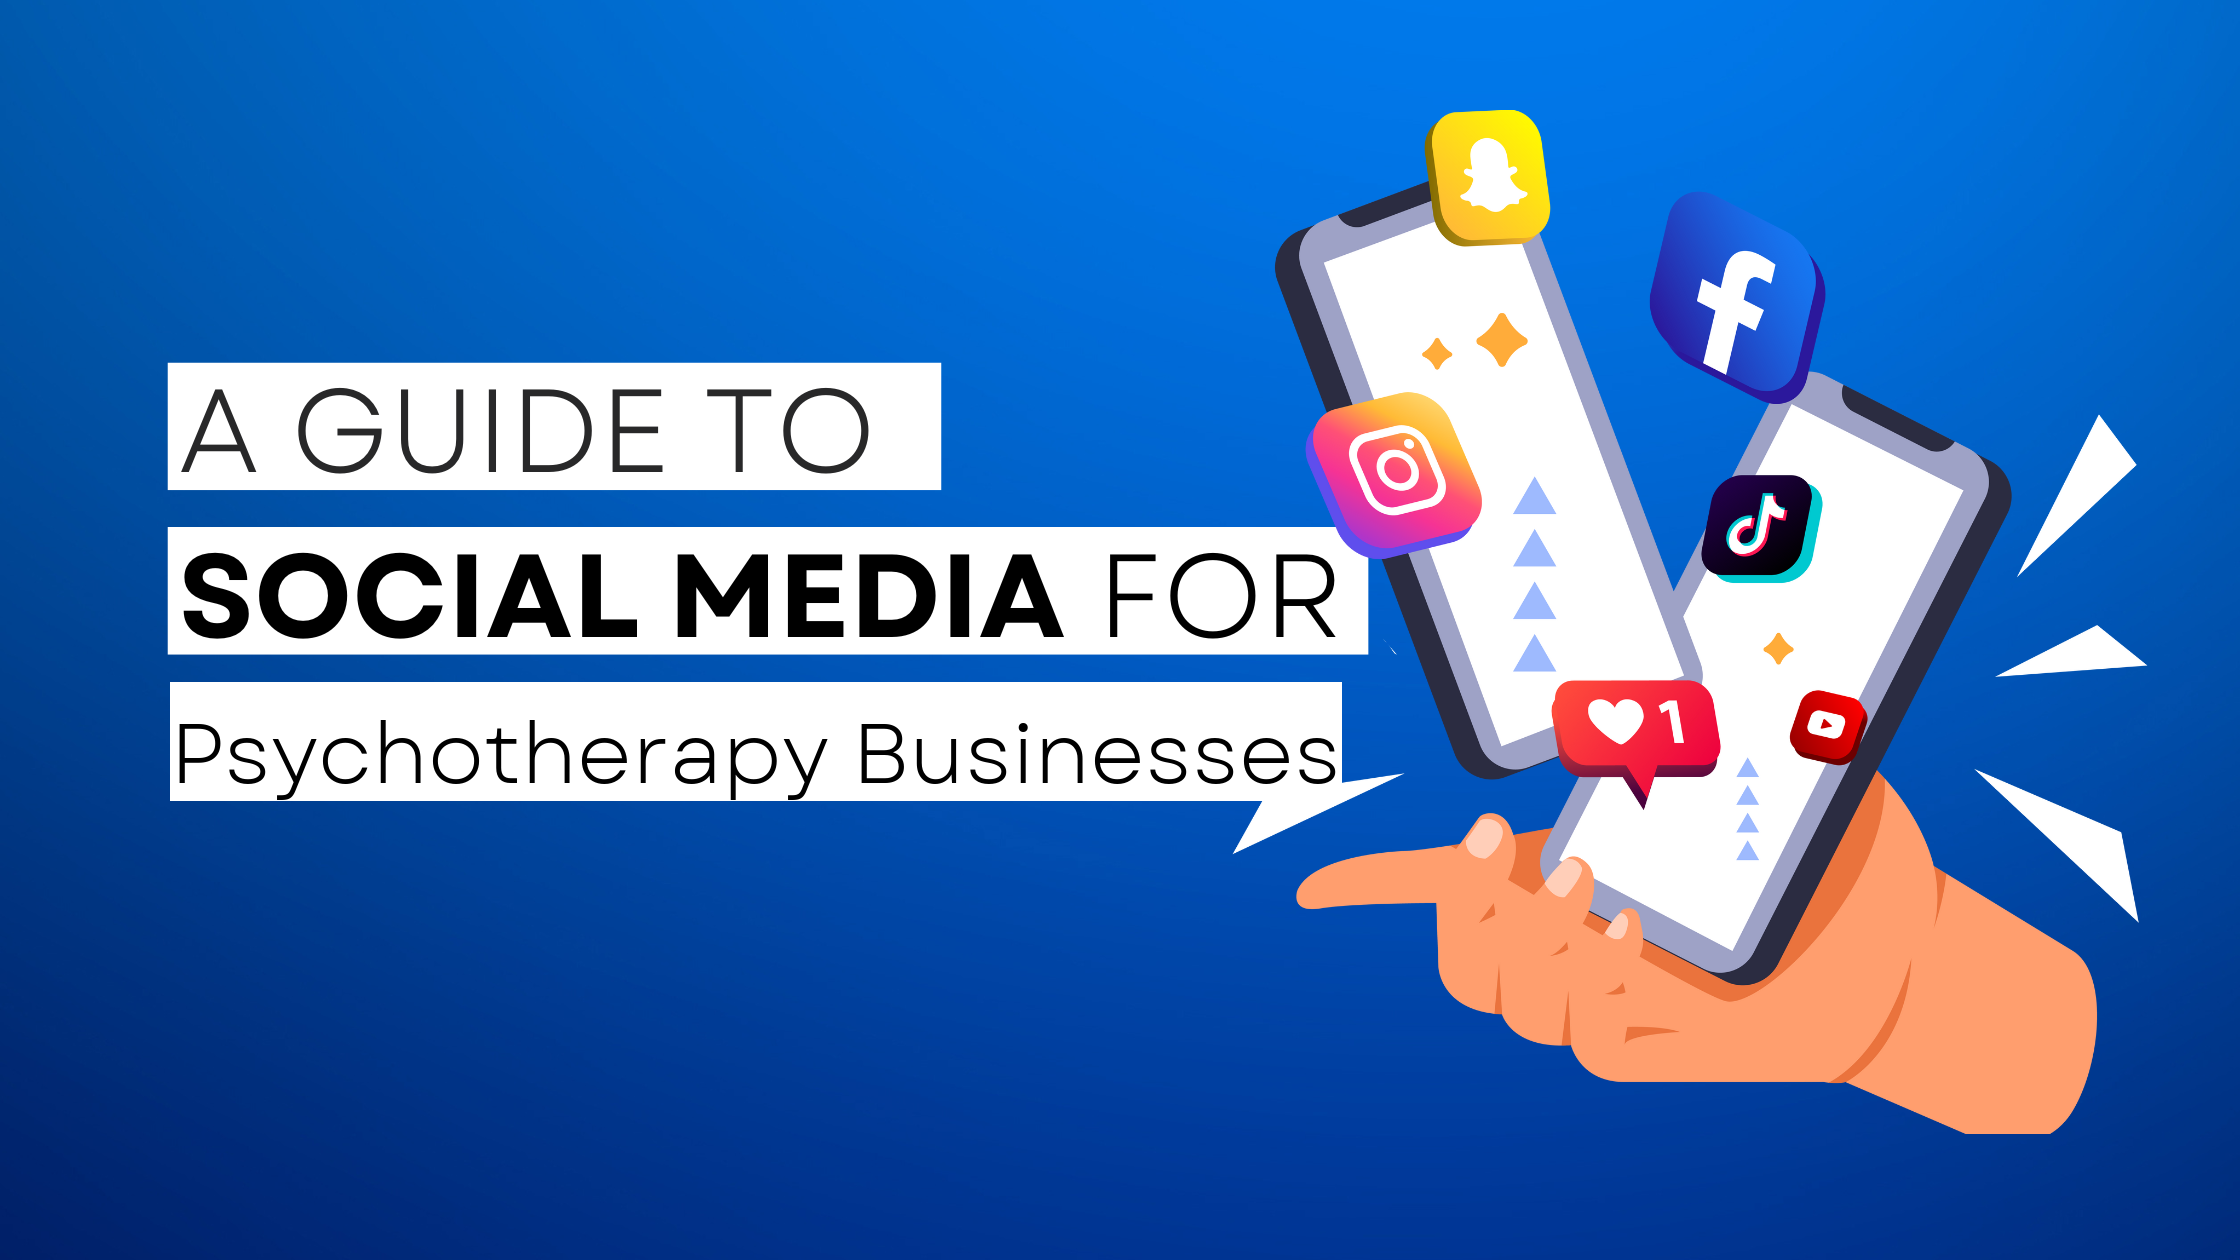 How to start Psychotherapy on social media